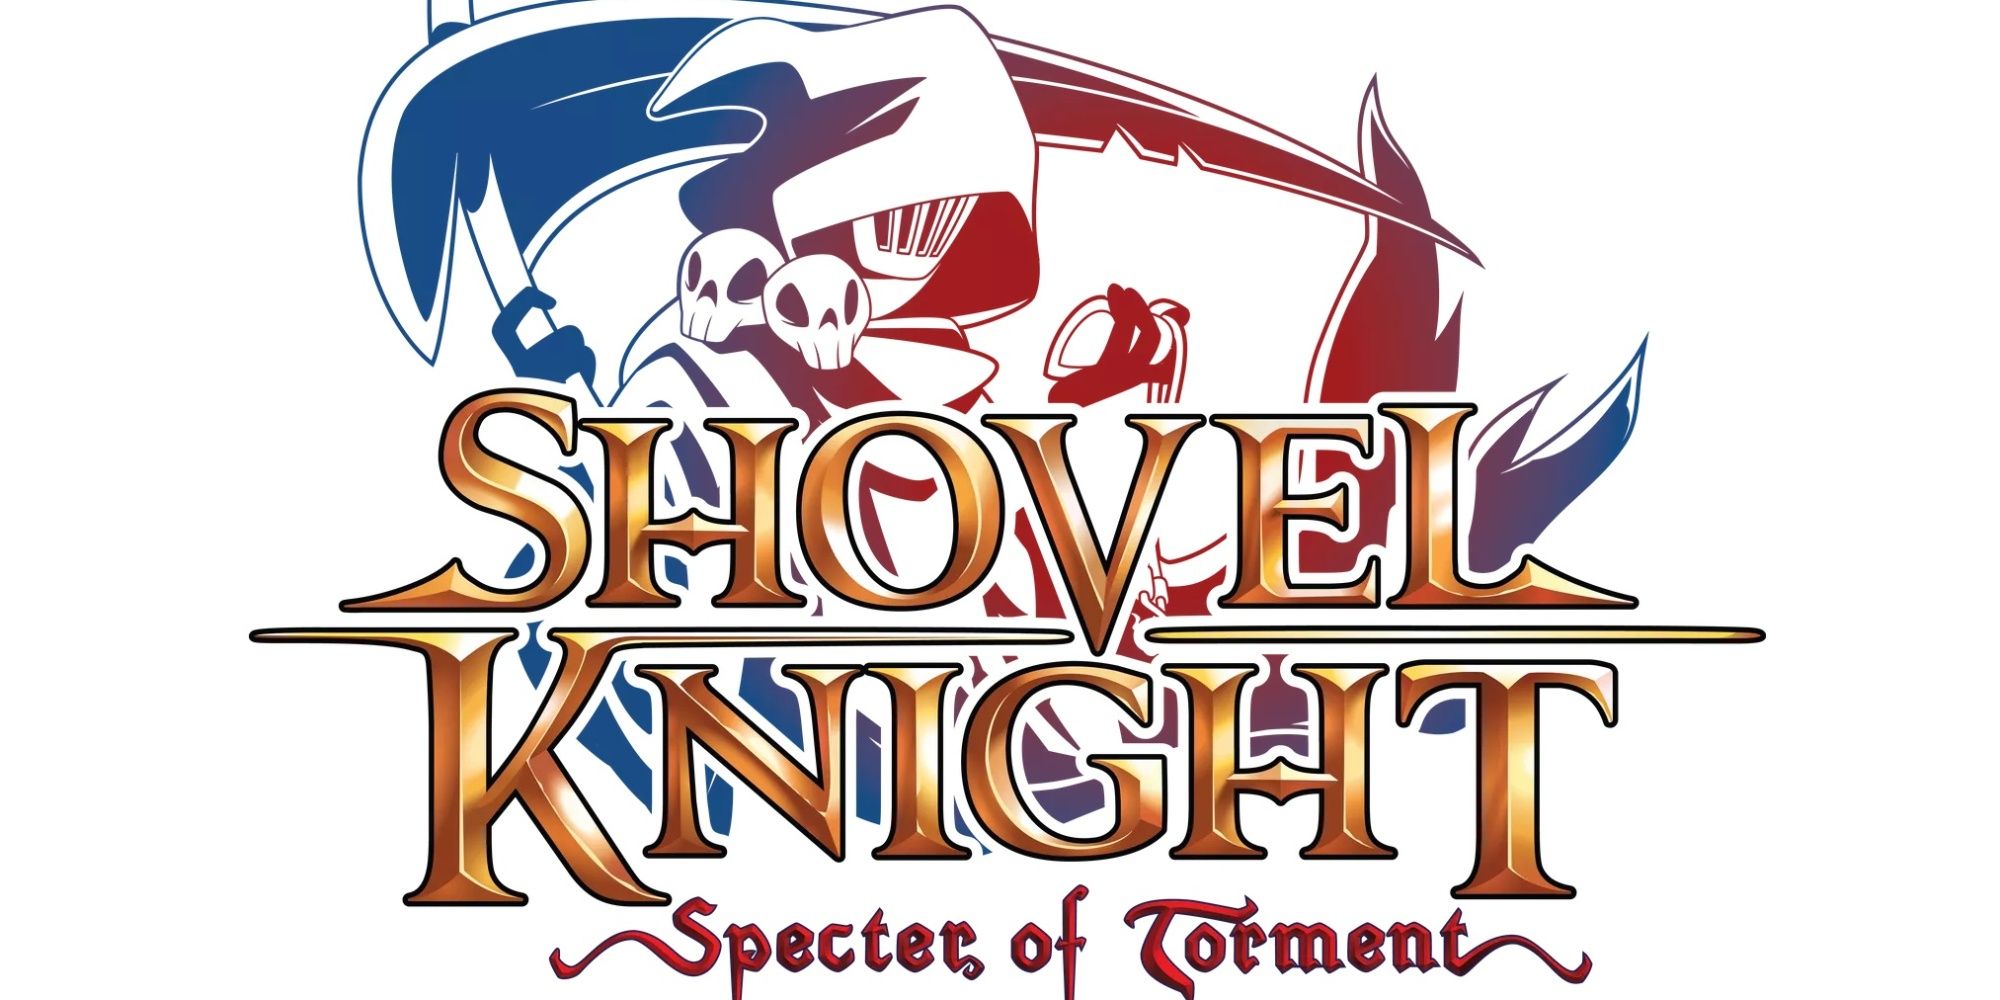 The logo from Shovel Knight Specter of Torment